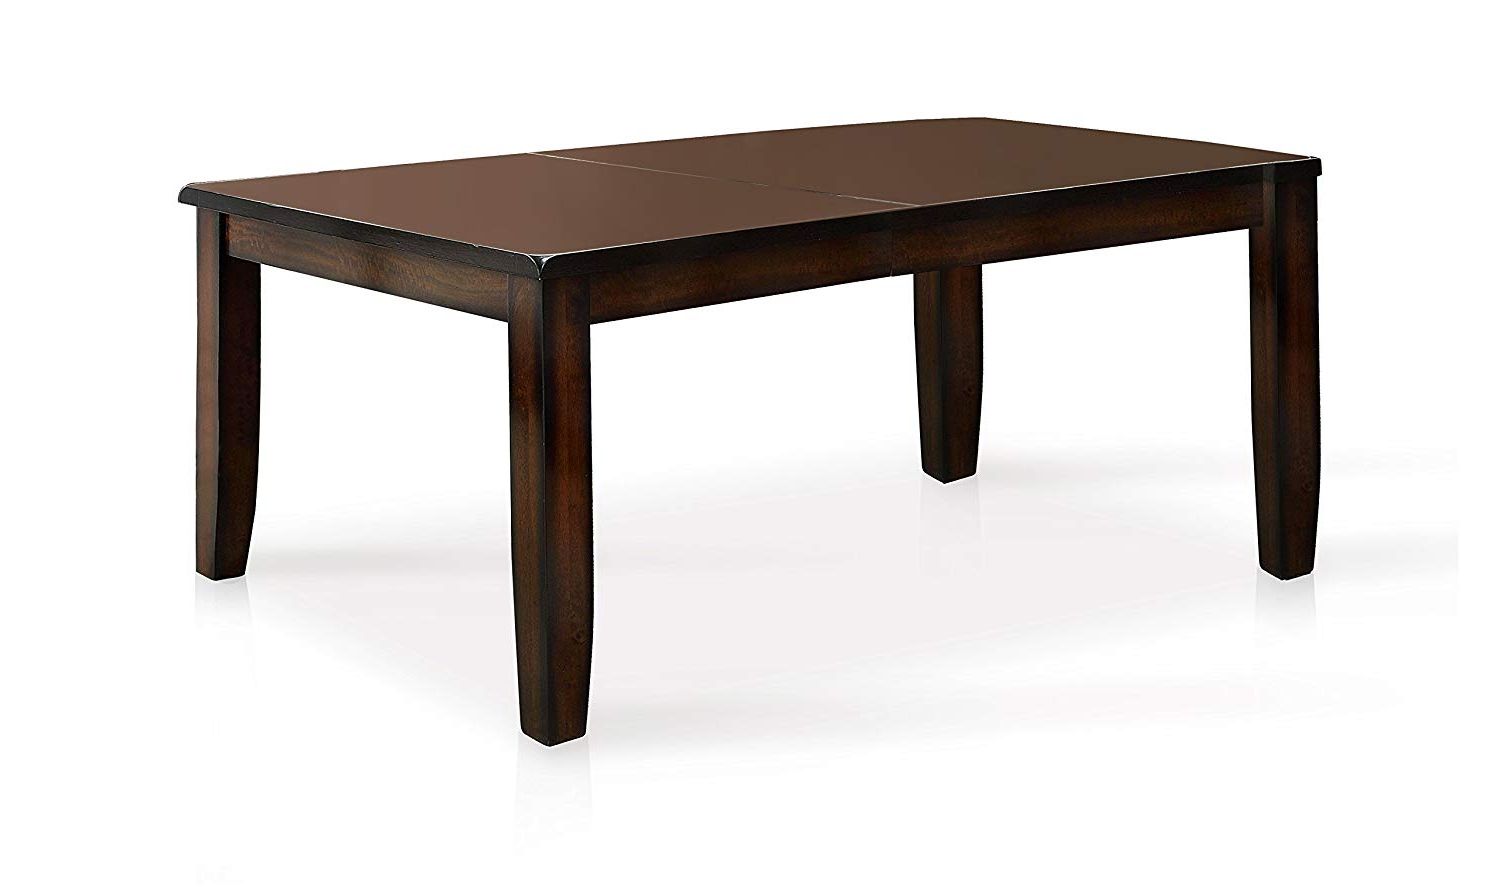 Charcoal Transitional 6 Seating Rectangular Dining Tables In Popular Amazon – Furniture Of America Dallas Transitional Dining (View 9 of 25)